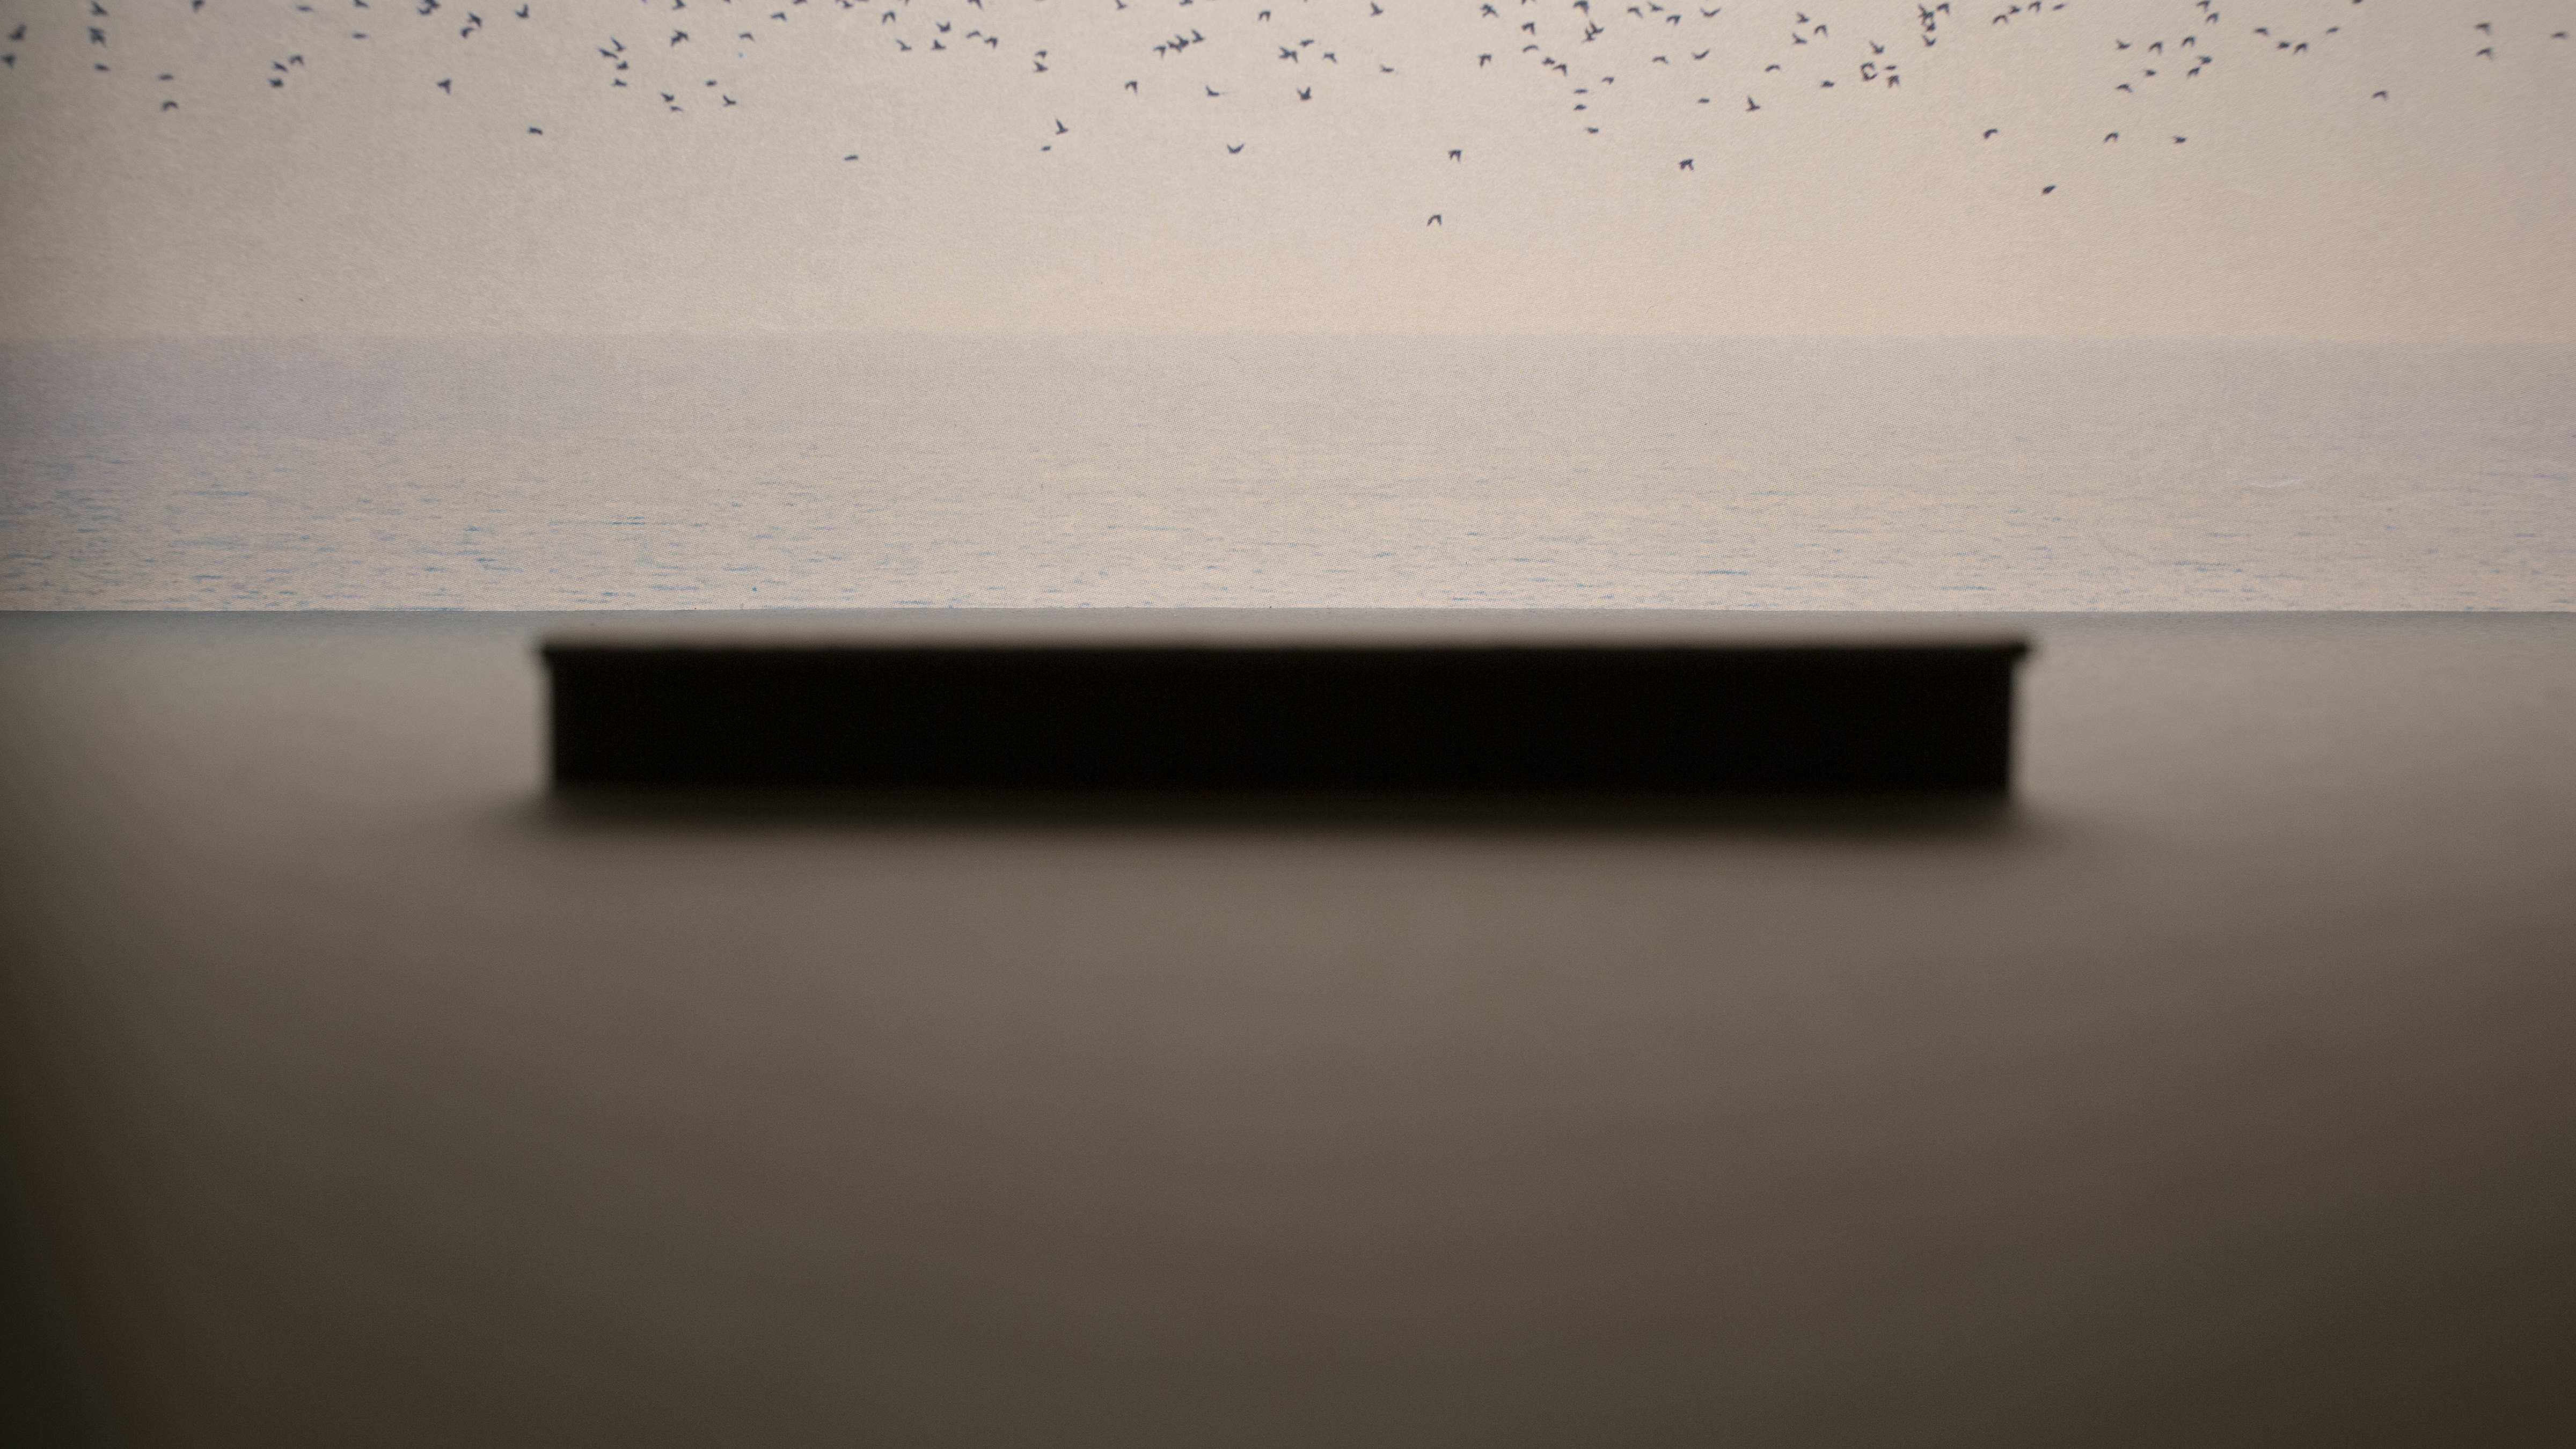 surreal image with birds flying over a table